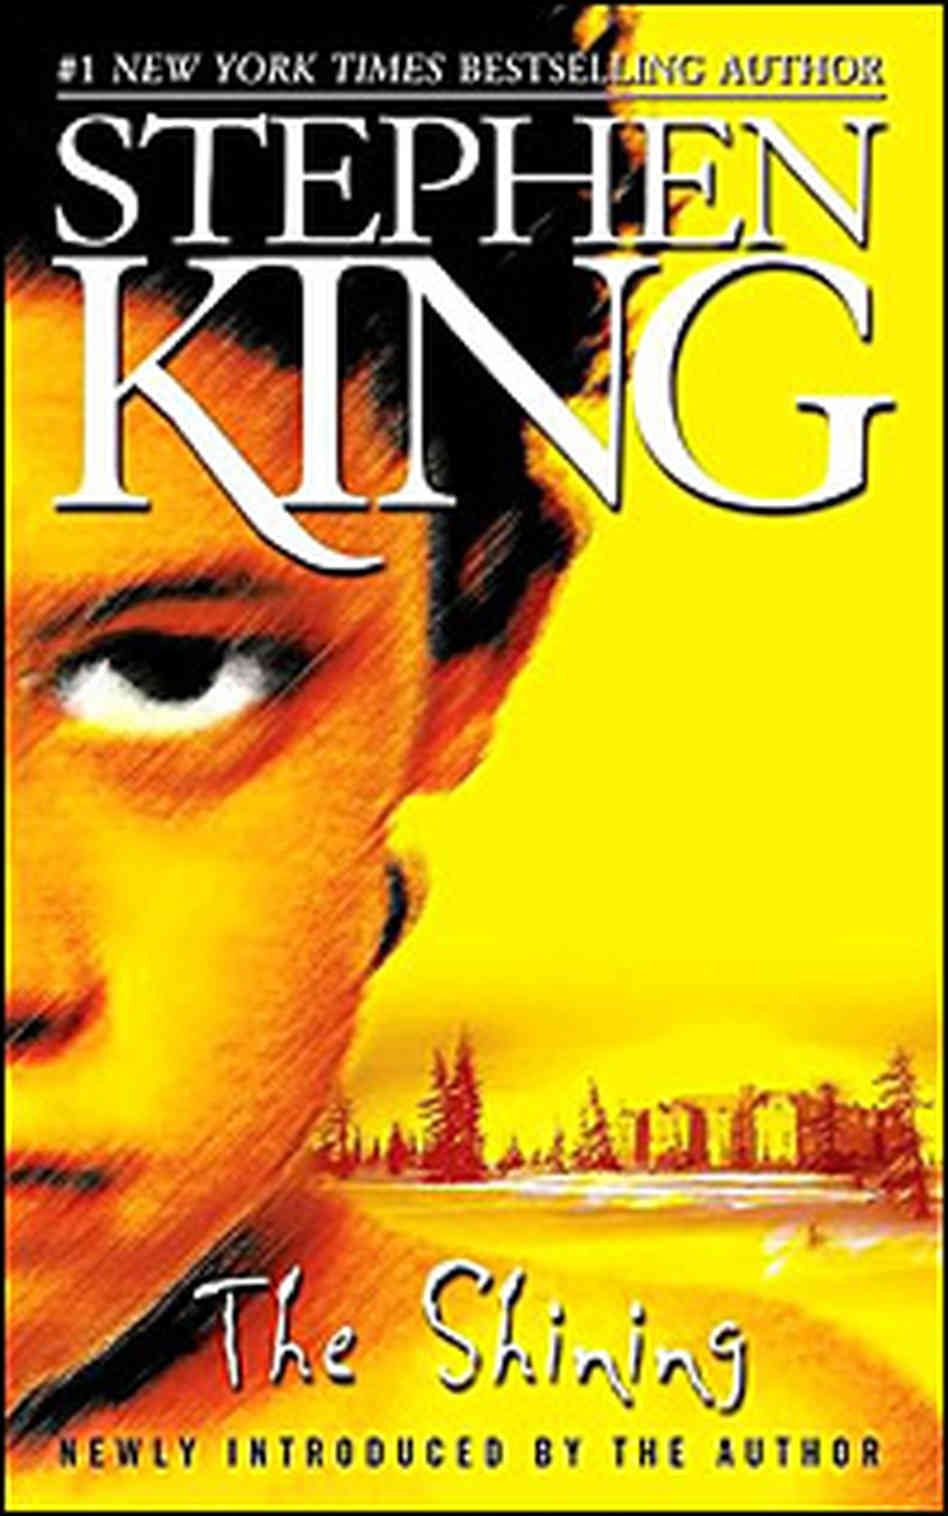 king the shining audiobook free